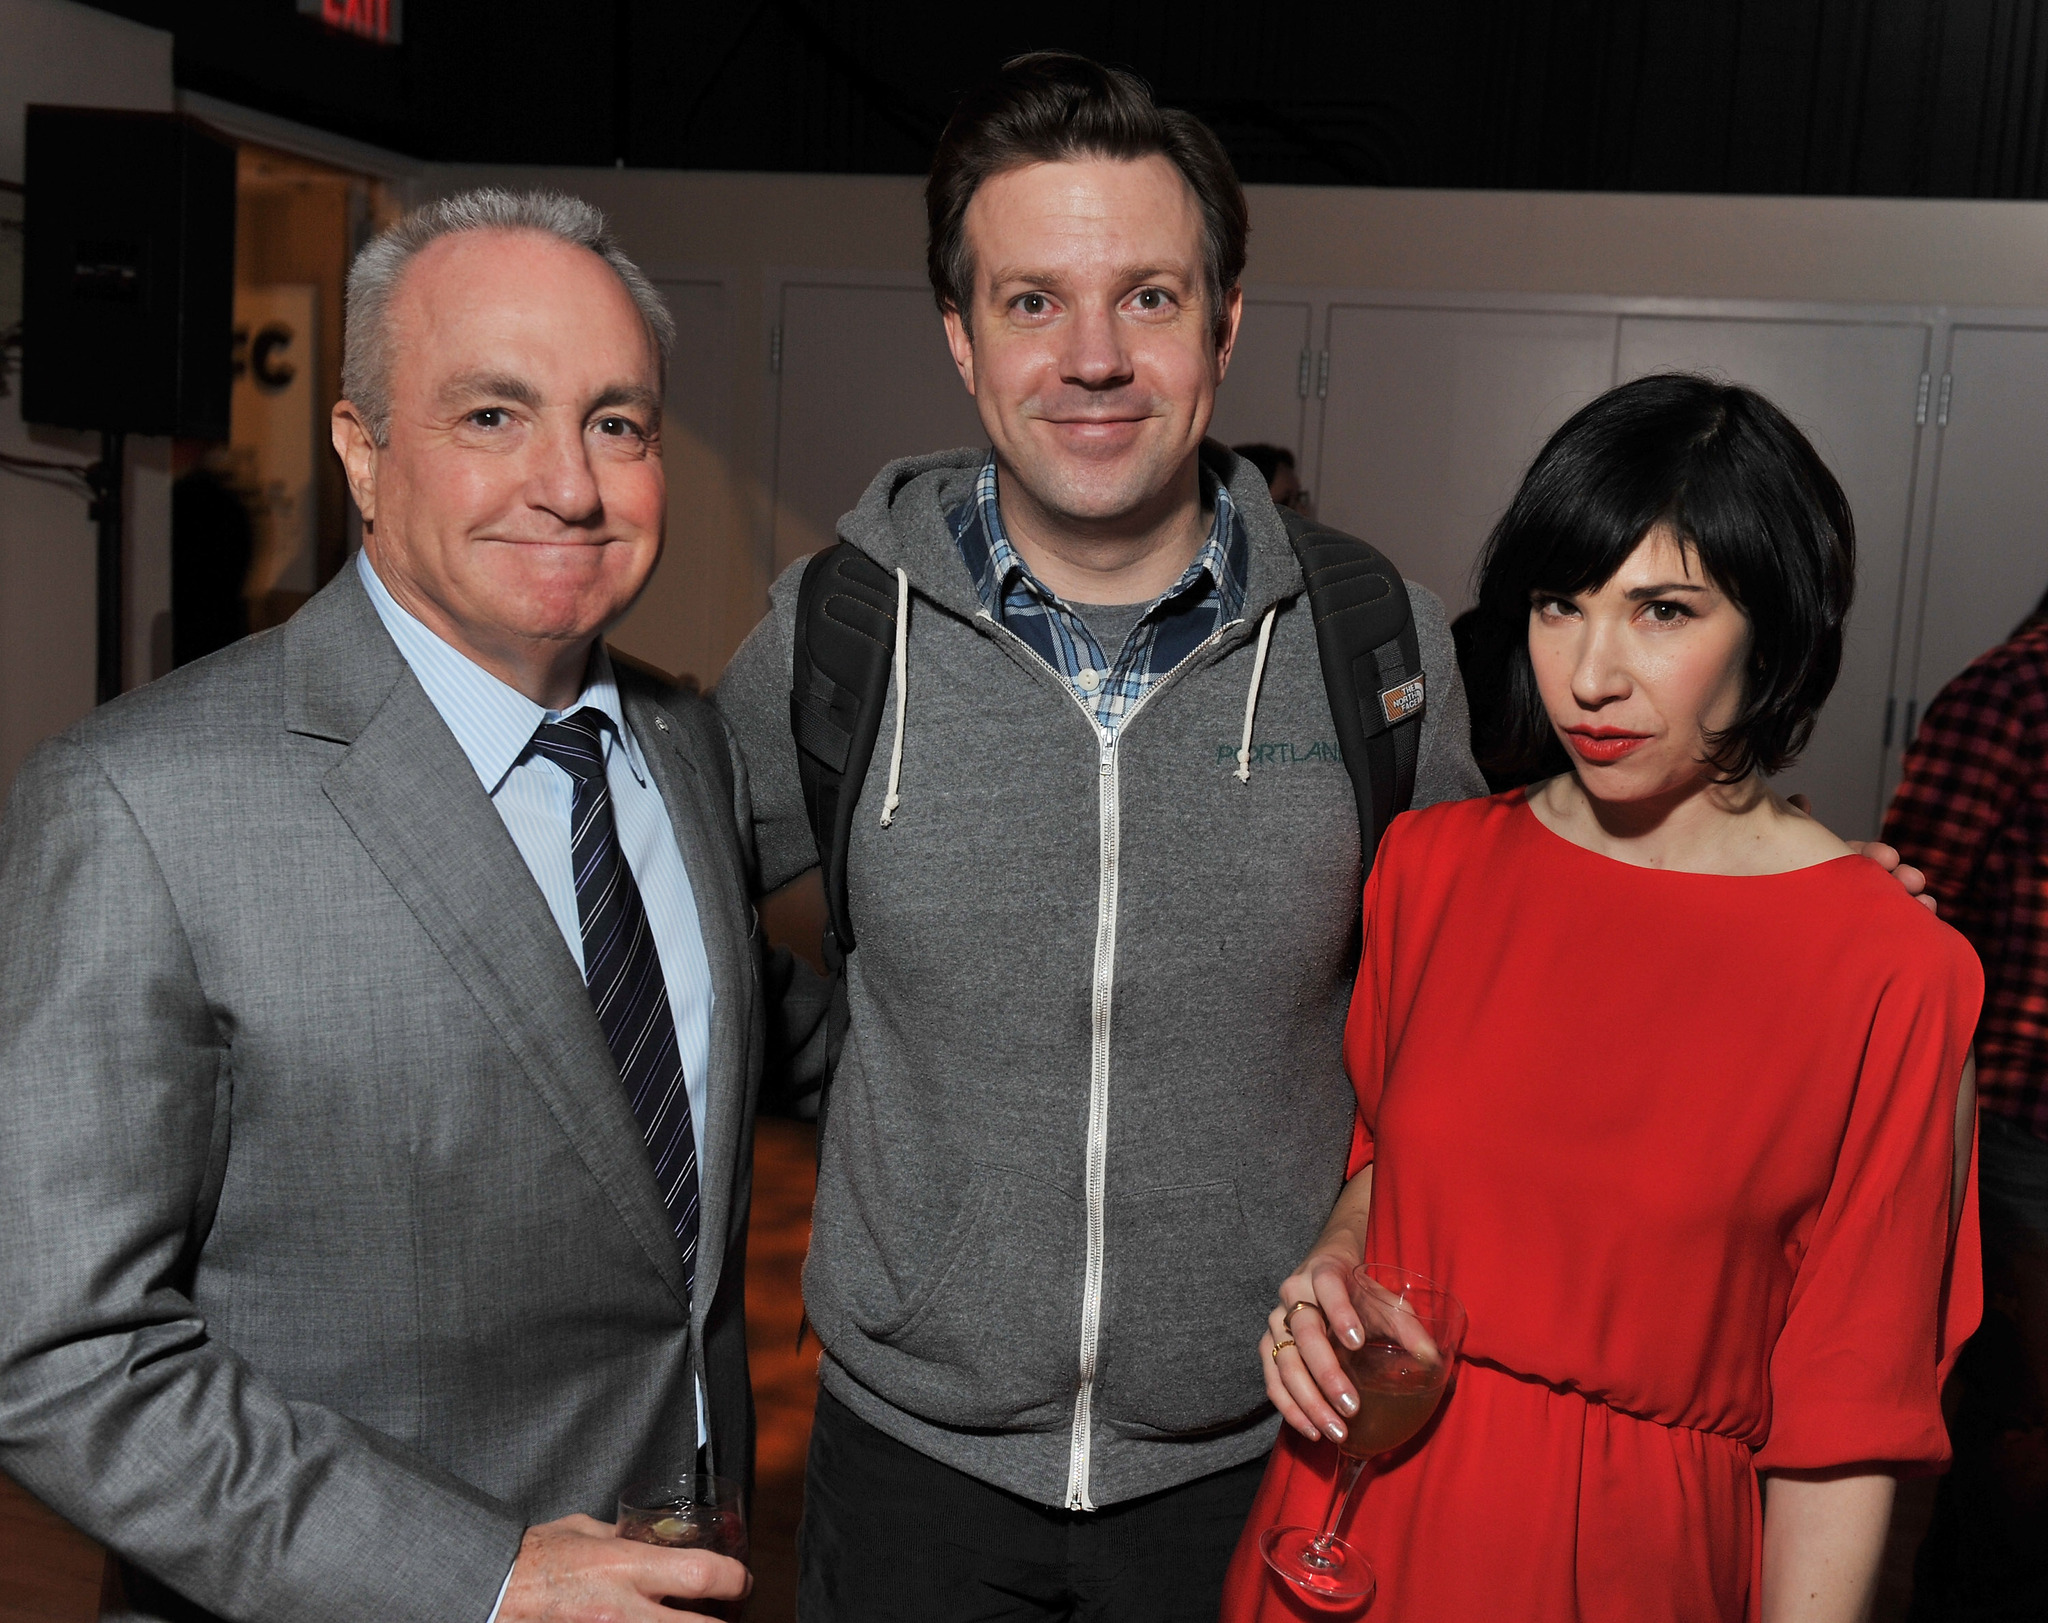 Lorne Michaels, Jason Sudeikis and Carrie Brownstein at event of Portlandia (2011)